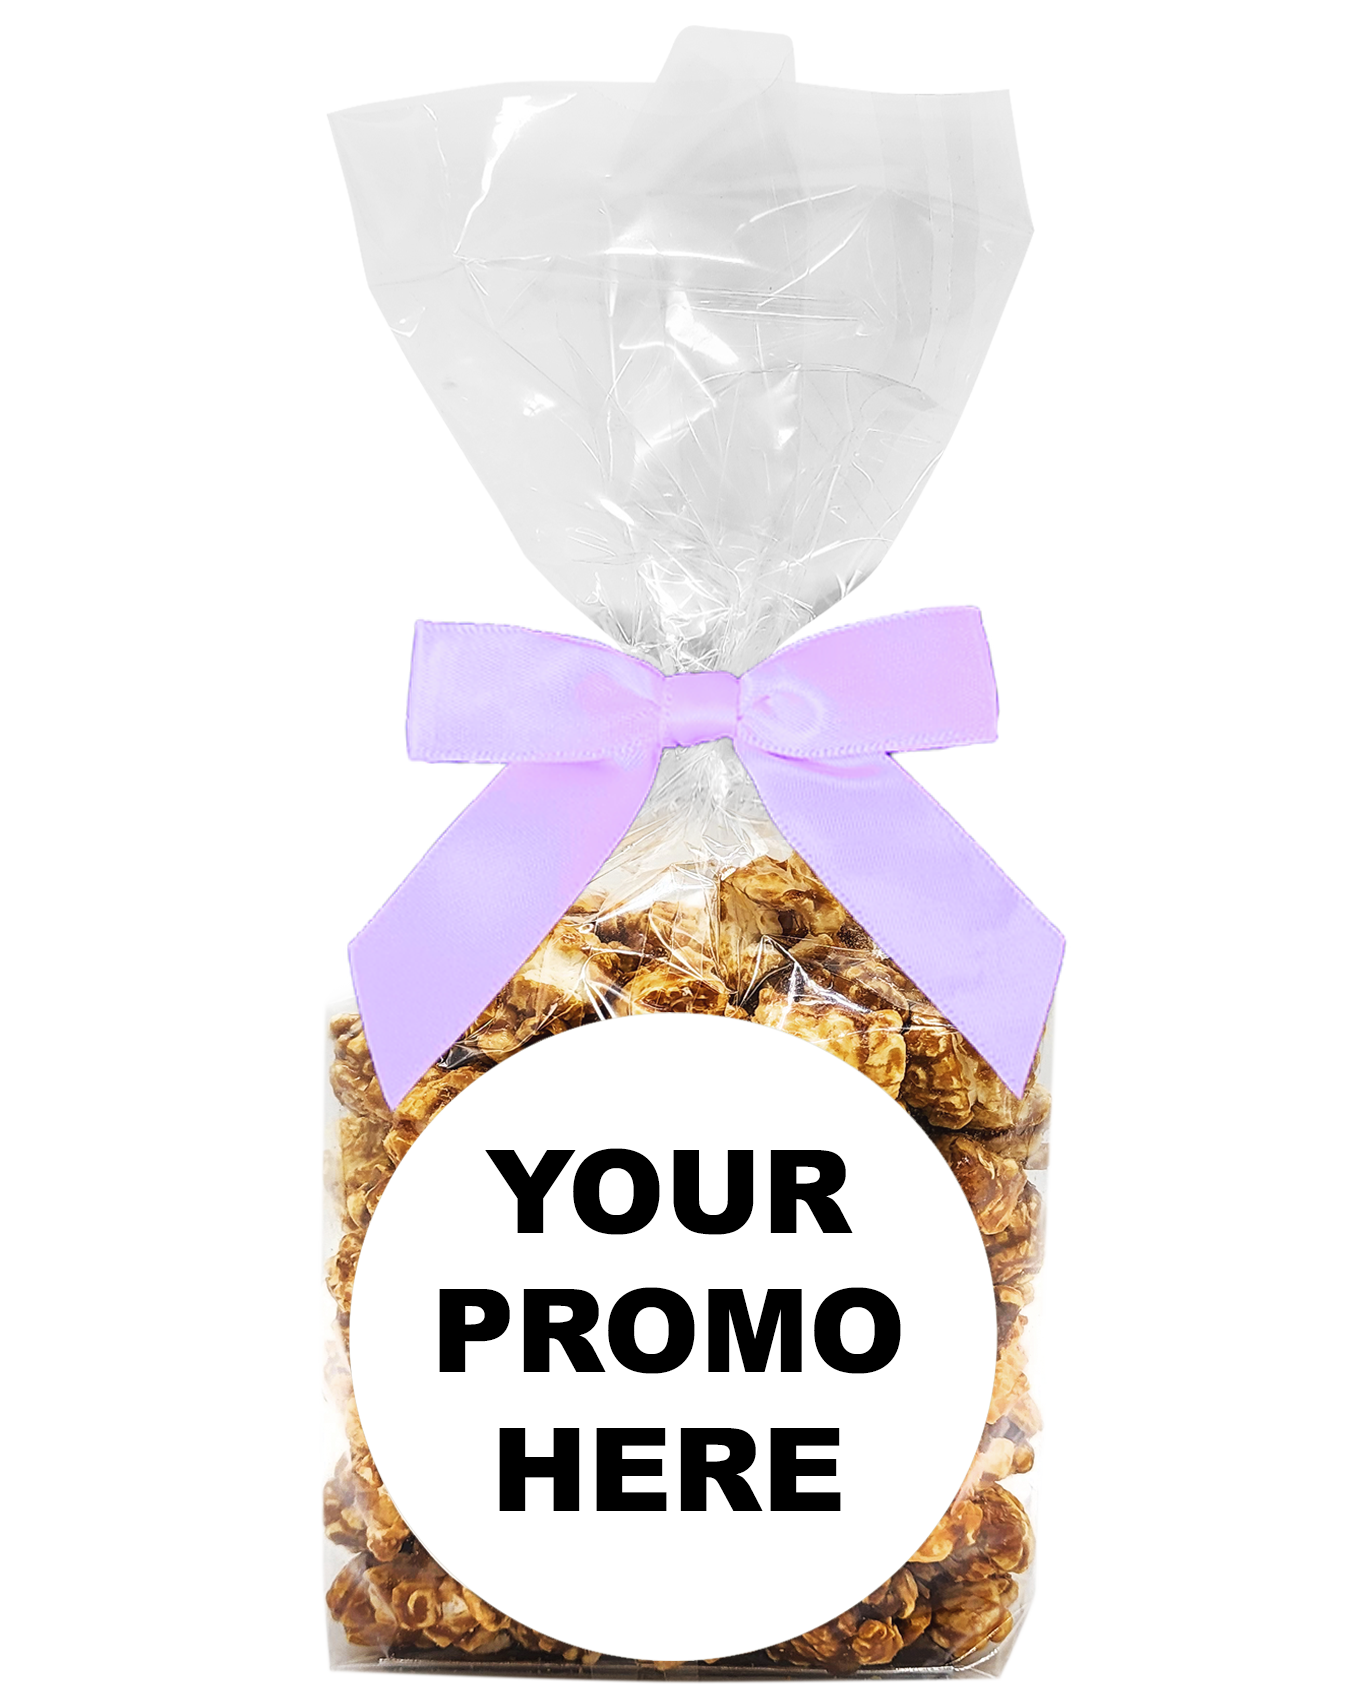 Kettle Clouds™ - Caramel Corn Bags & Bows (as low as $4.49 per bag) Case of 12 Price